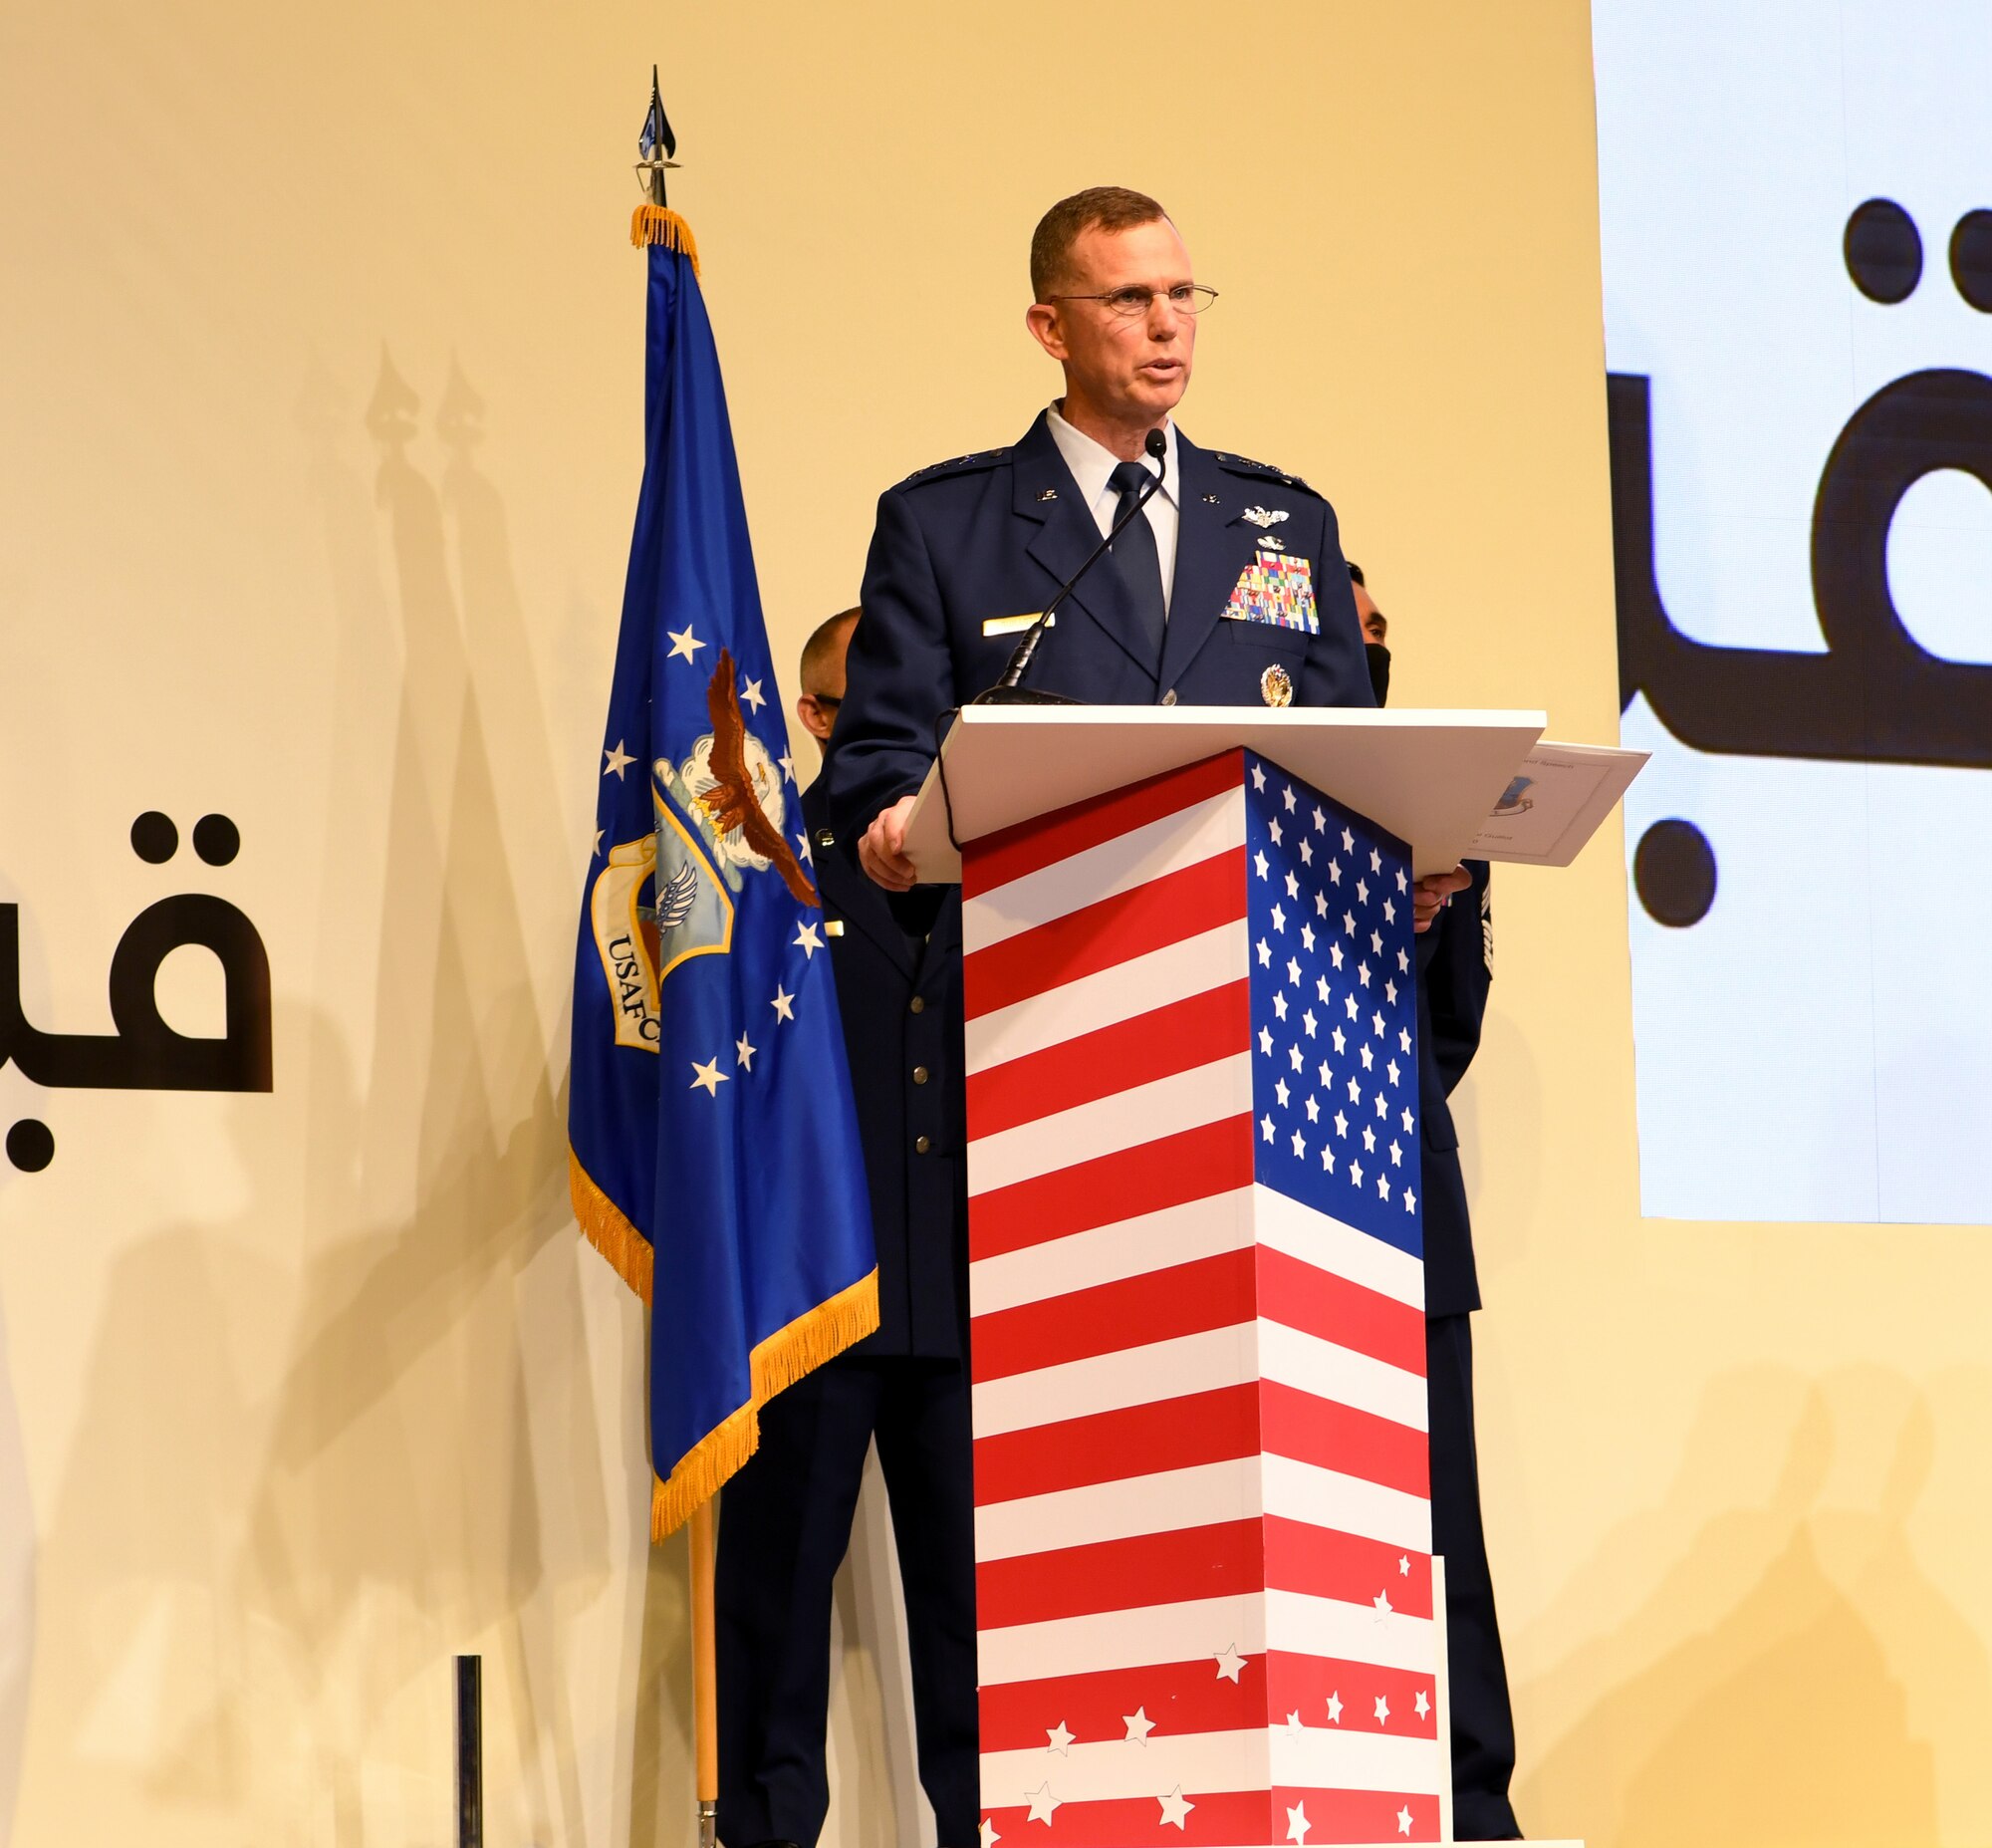 U.S. Air Force Lt. Gen. Gregory Guillot delivers remarks after becoming the commander of U.S. Air Forces Central Command and the combined forces air component commander during a change of command ceremony at Al Udeid Air Base, Qatar, July 16, 2020